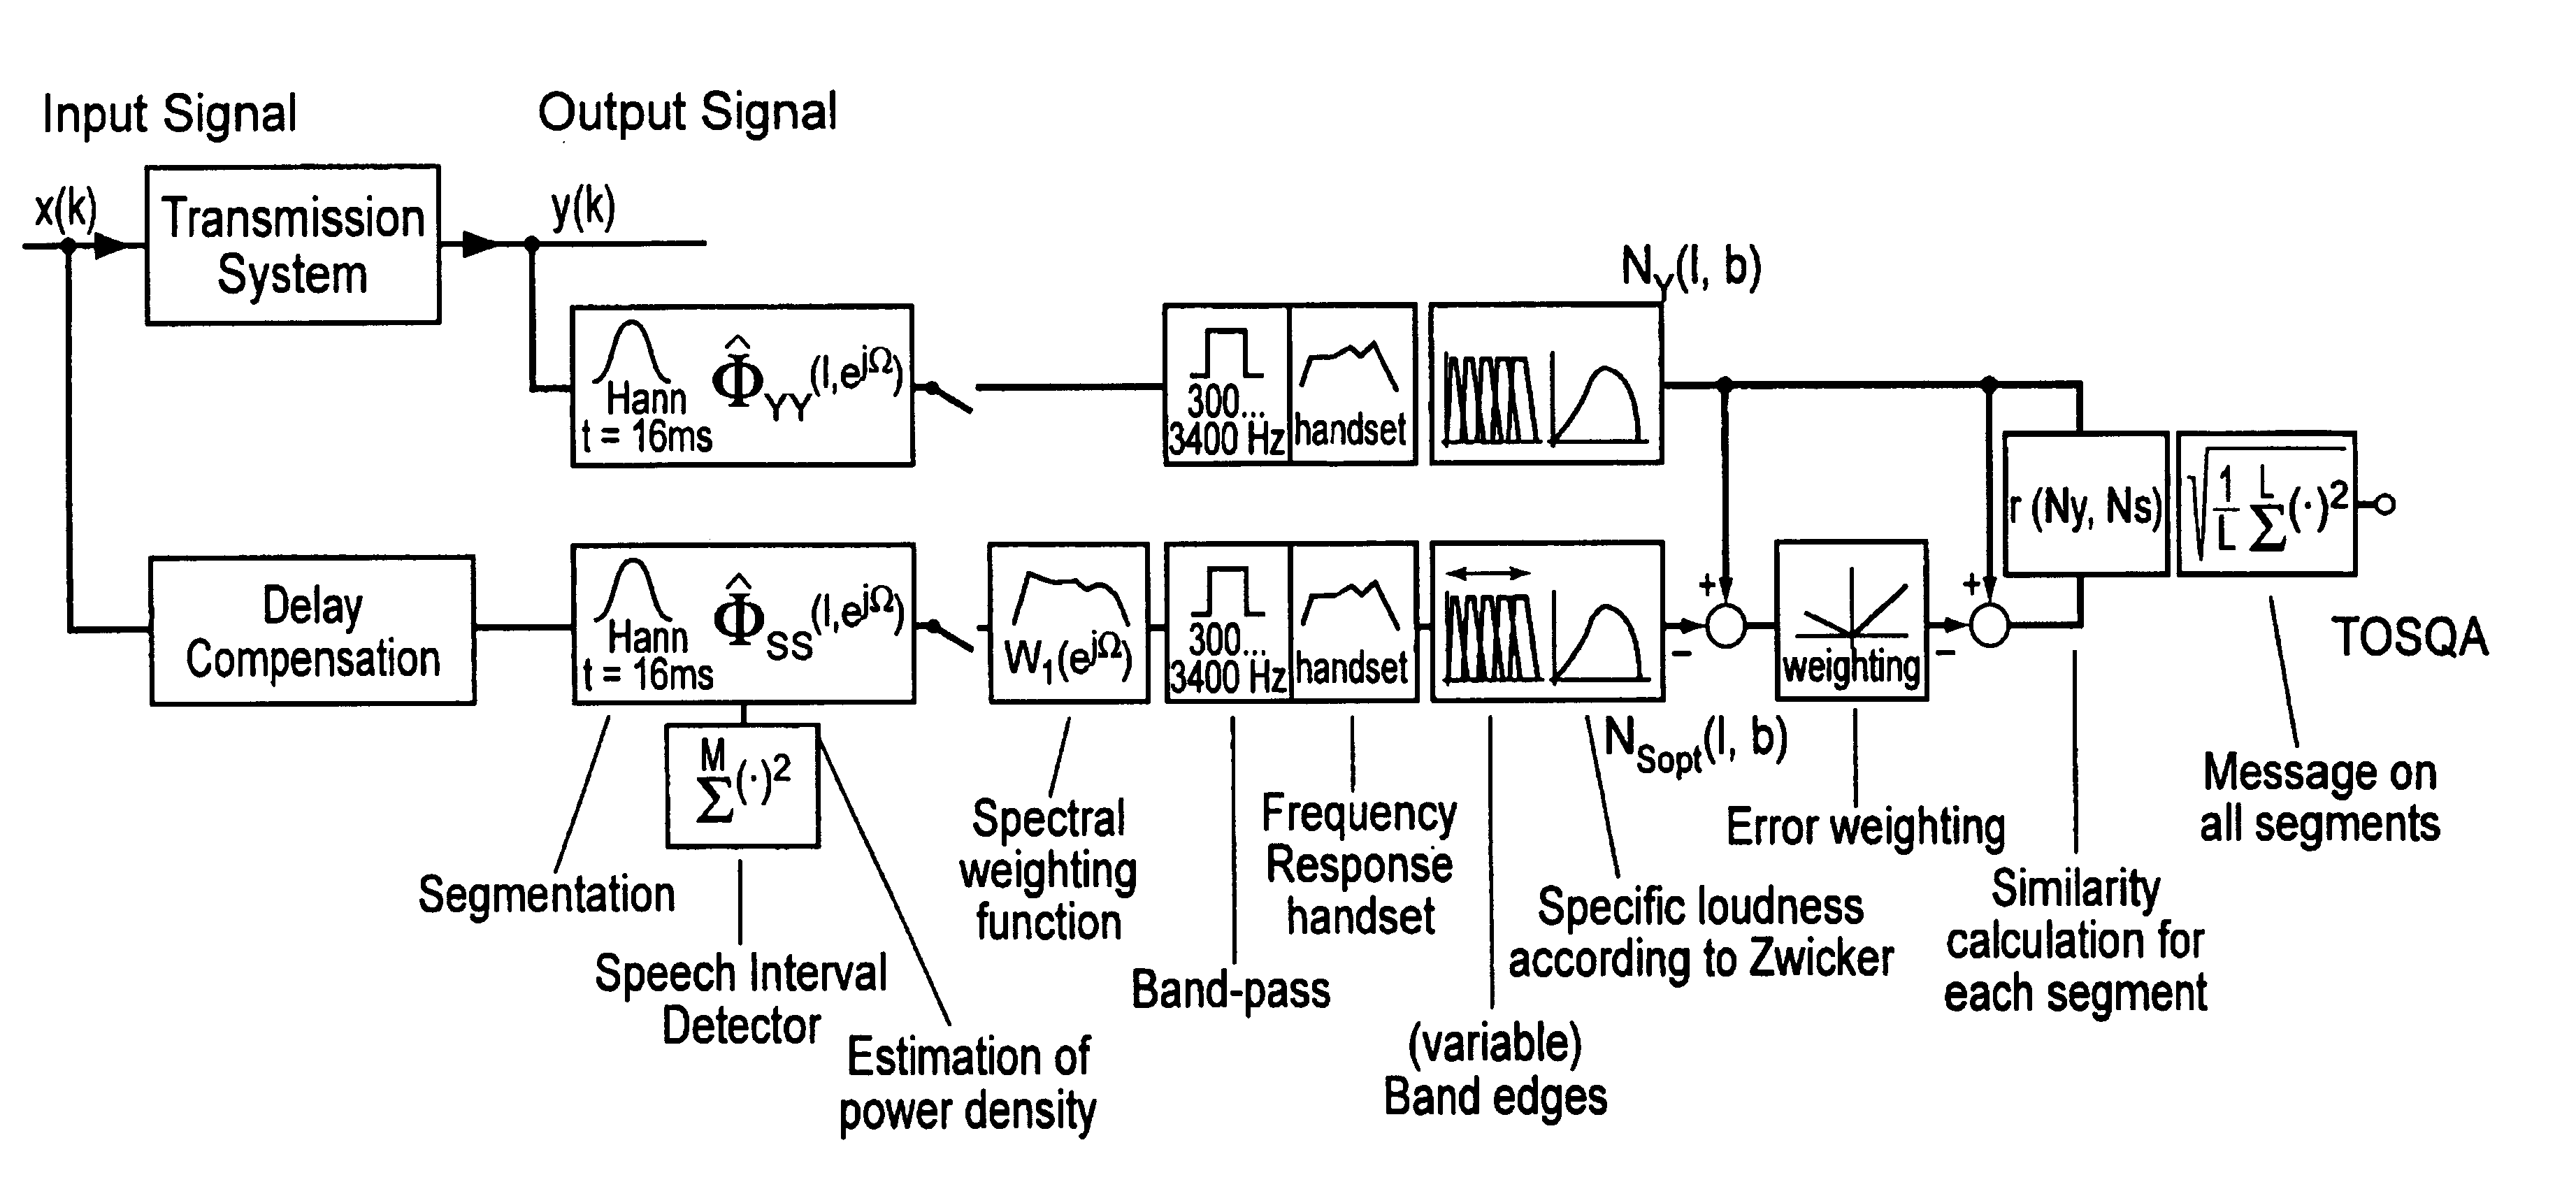 Method for determining speech quality by comparison of signal properties